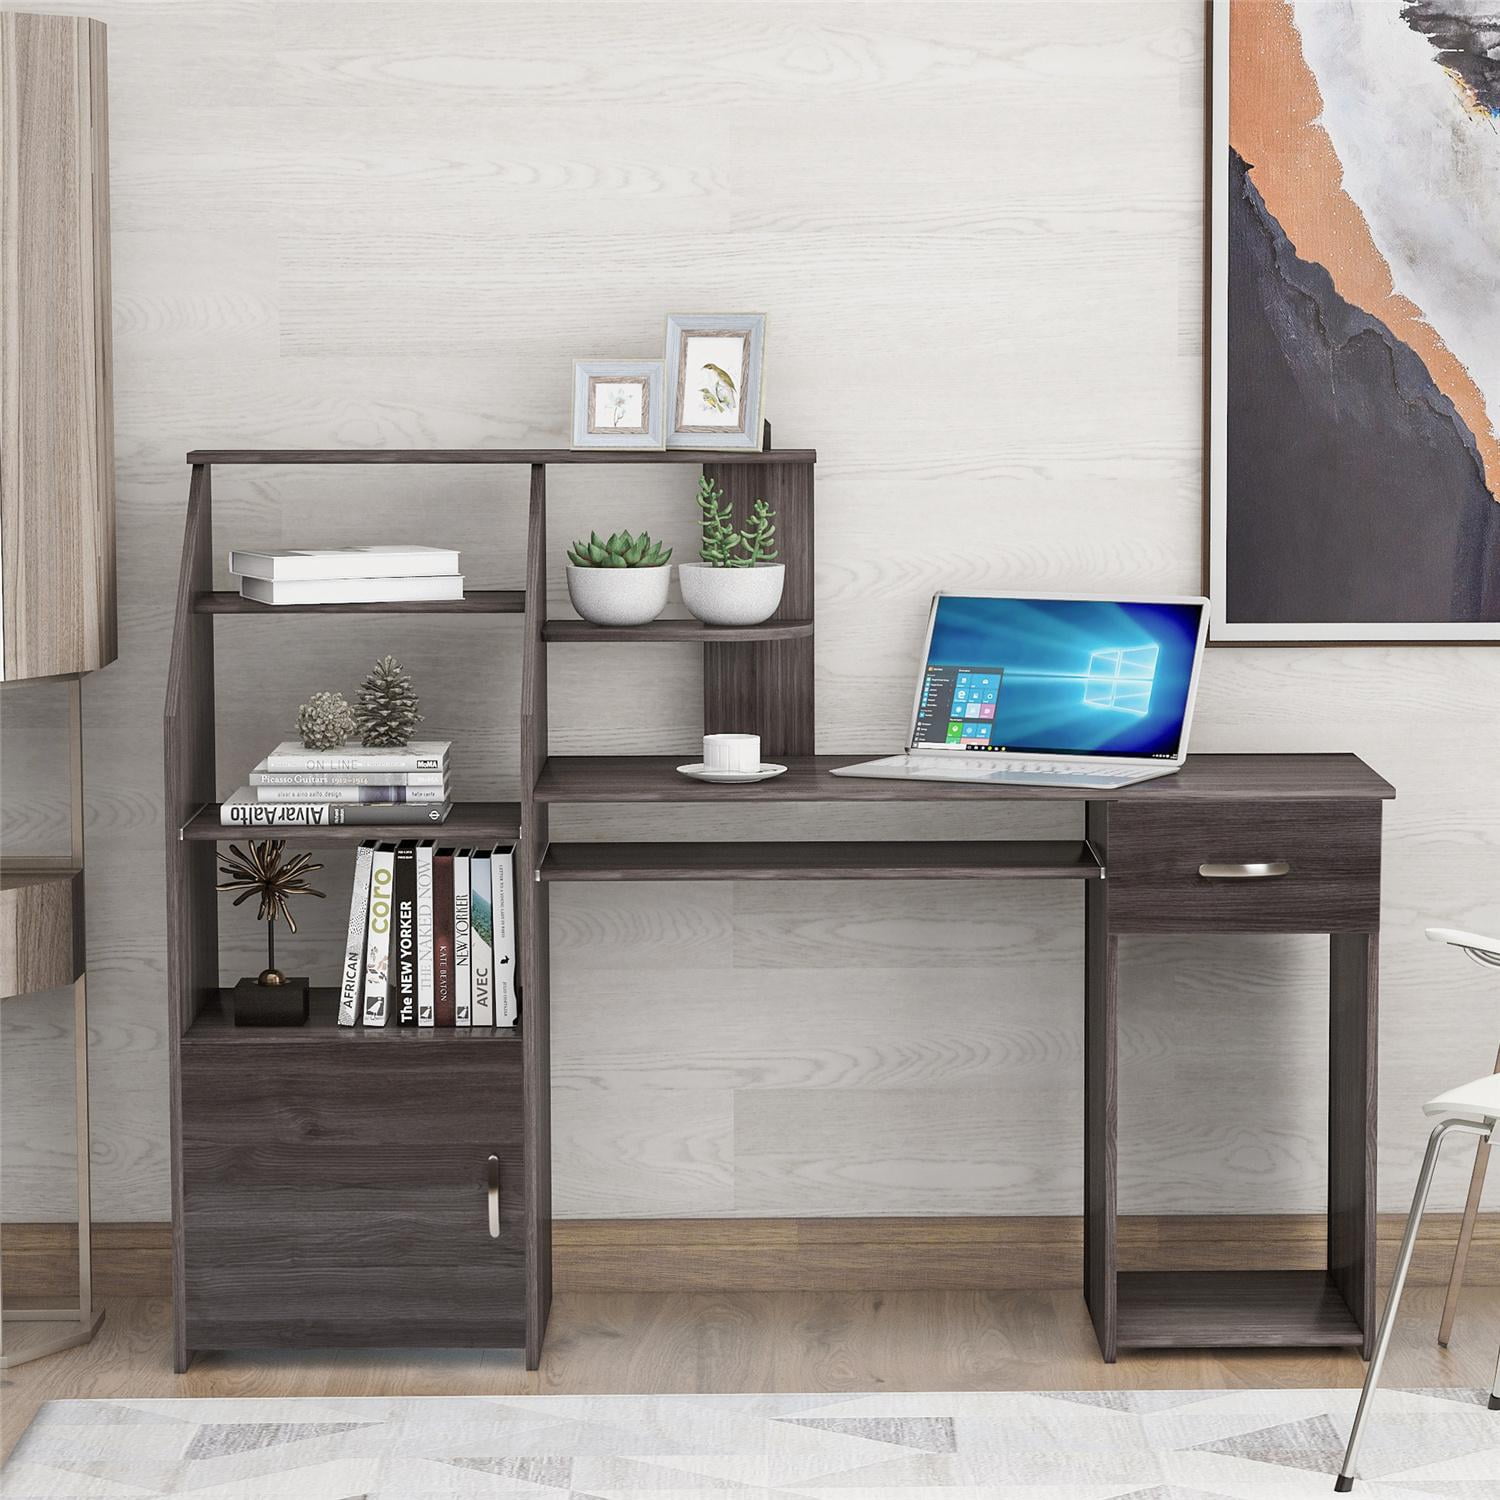 Details about   Computer Desk Home Office Study PC Laptop Table Workstation Book Shelf W/ Drawer 